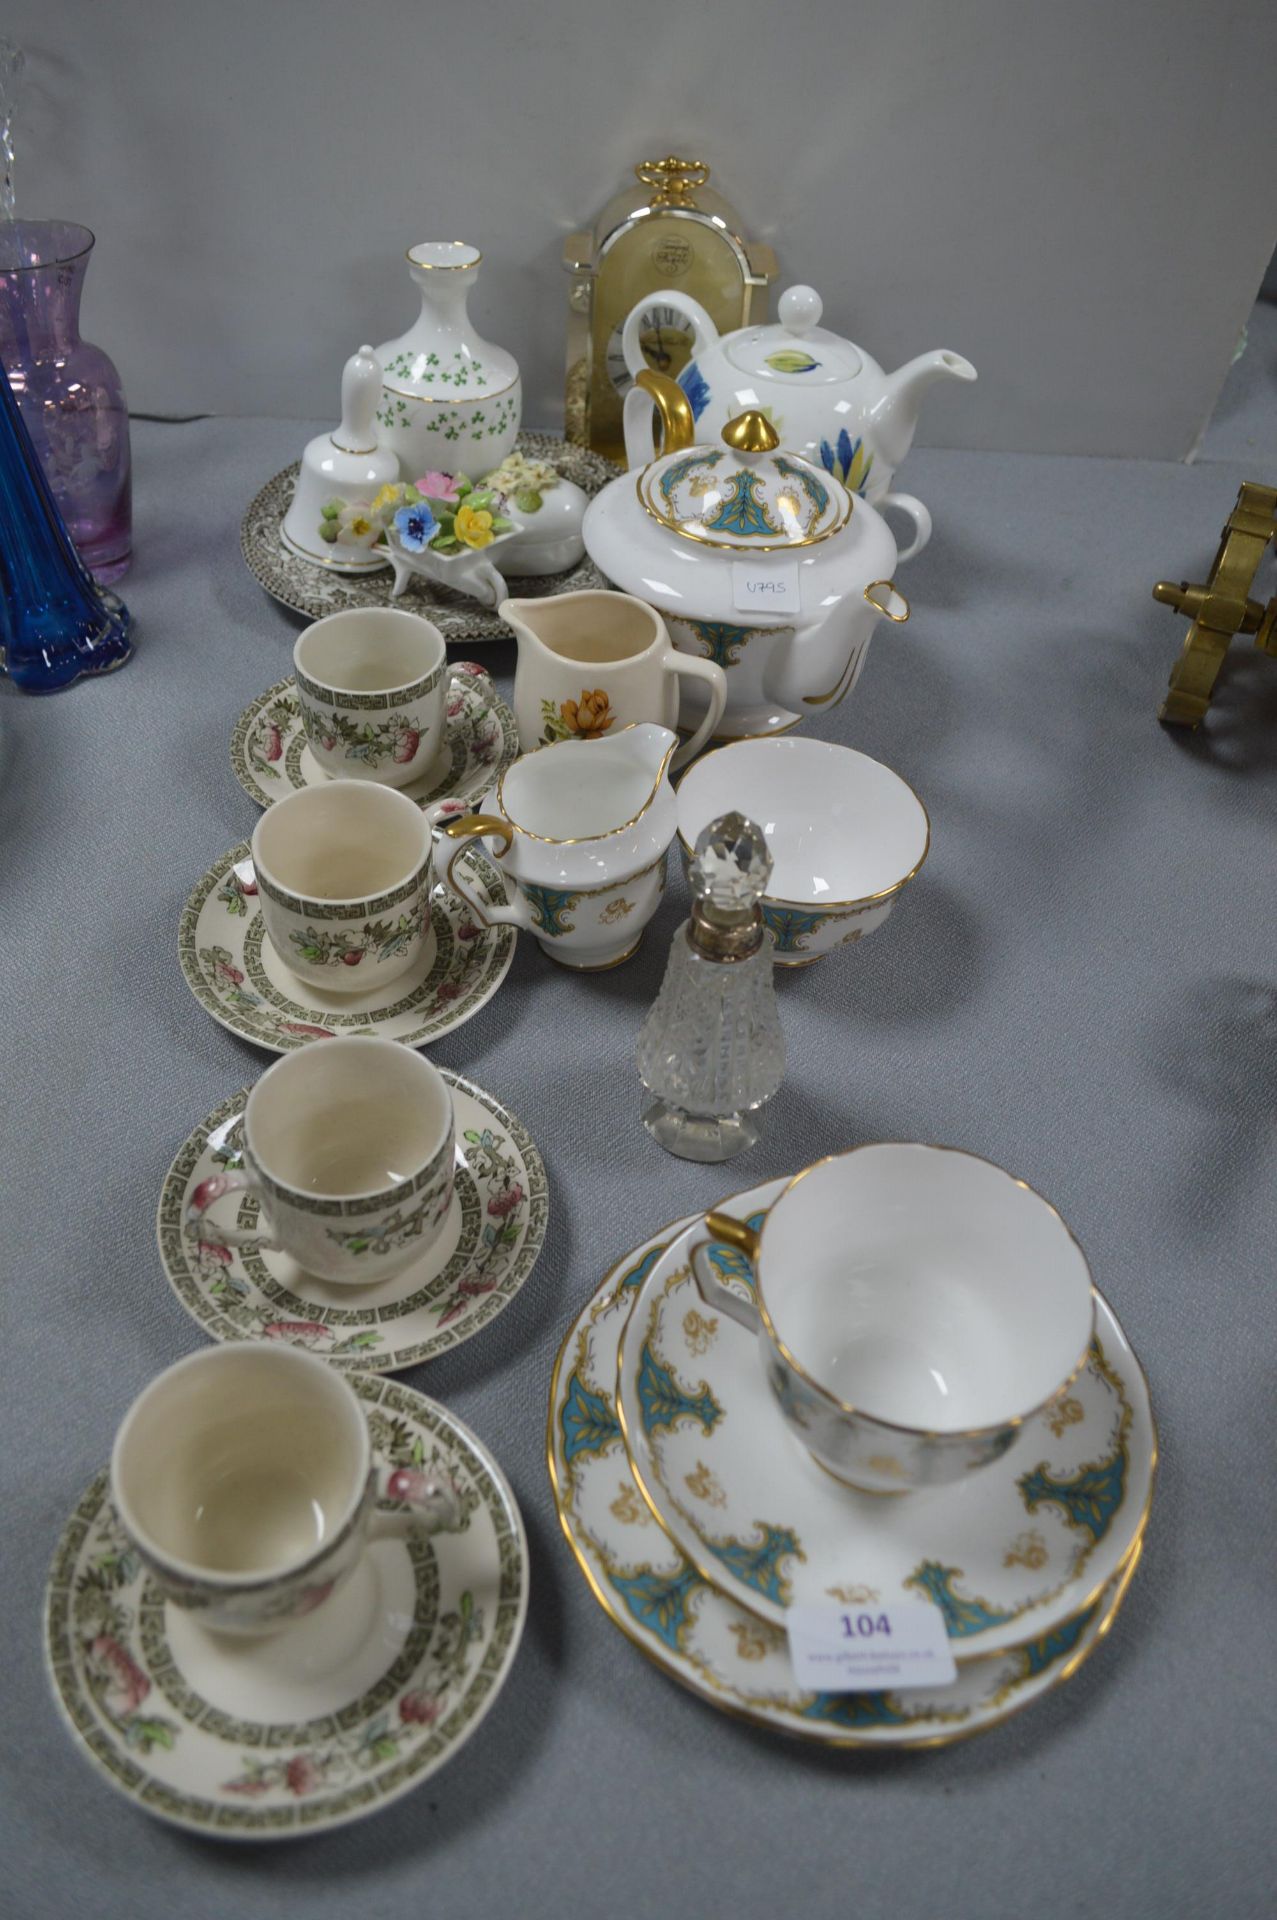 Teapots and China Cups etc.